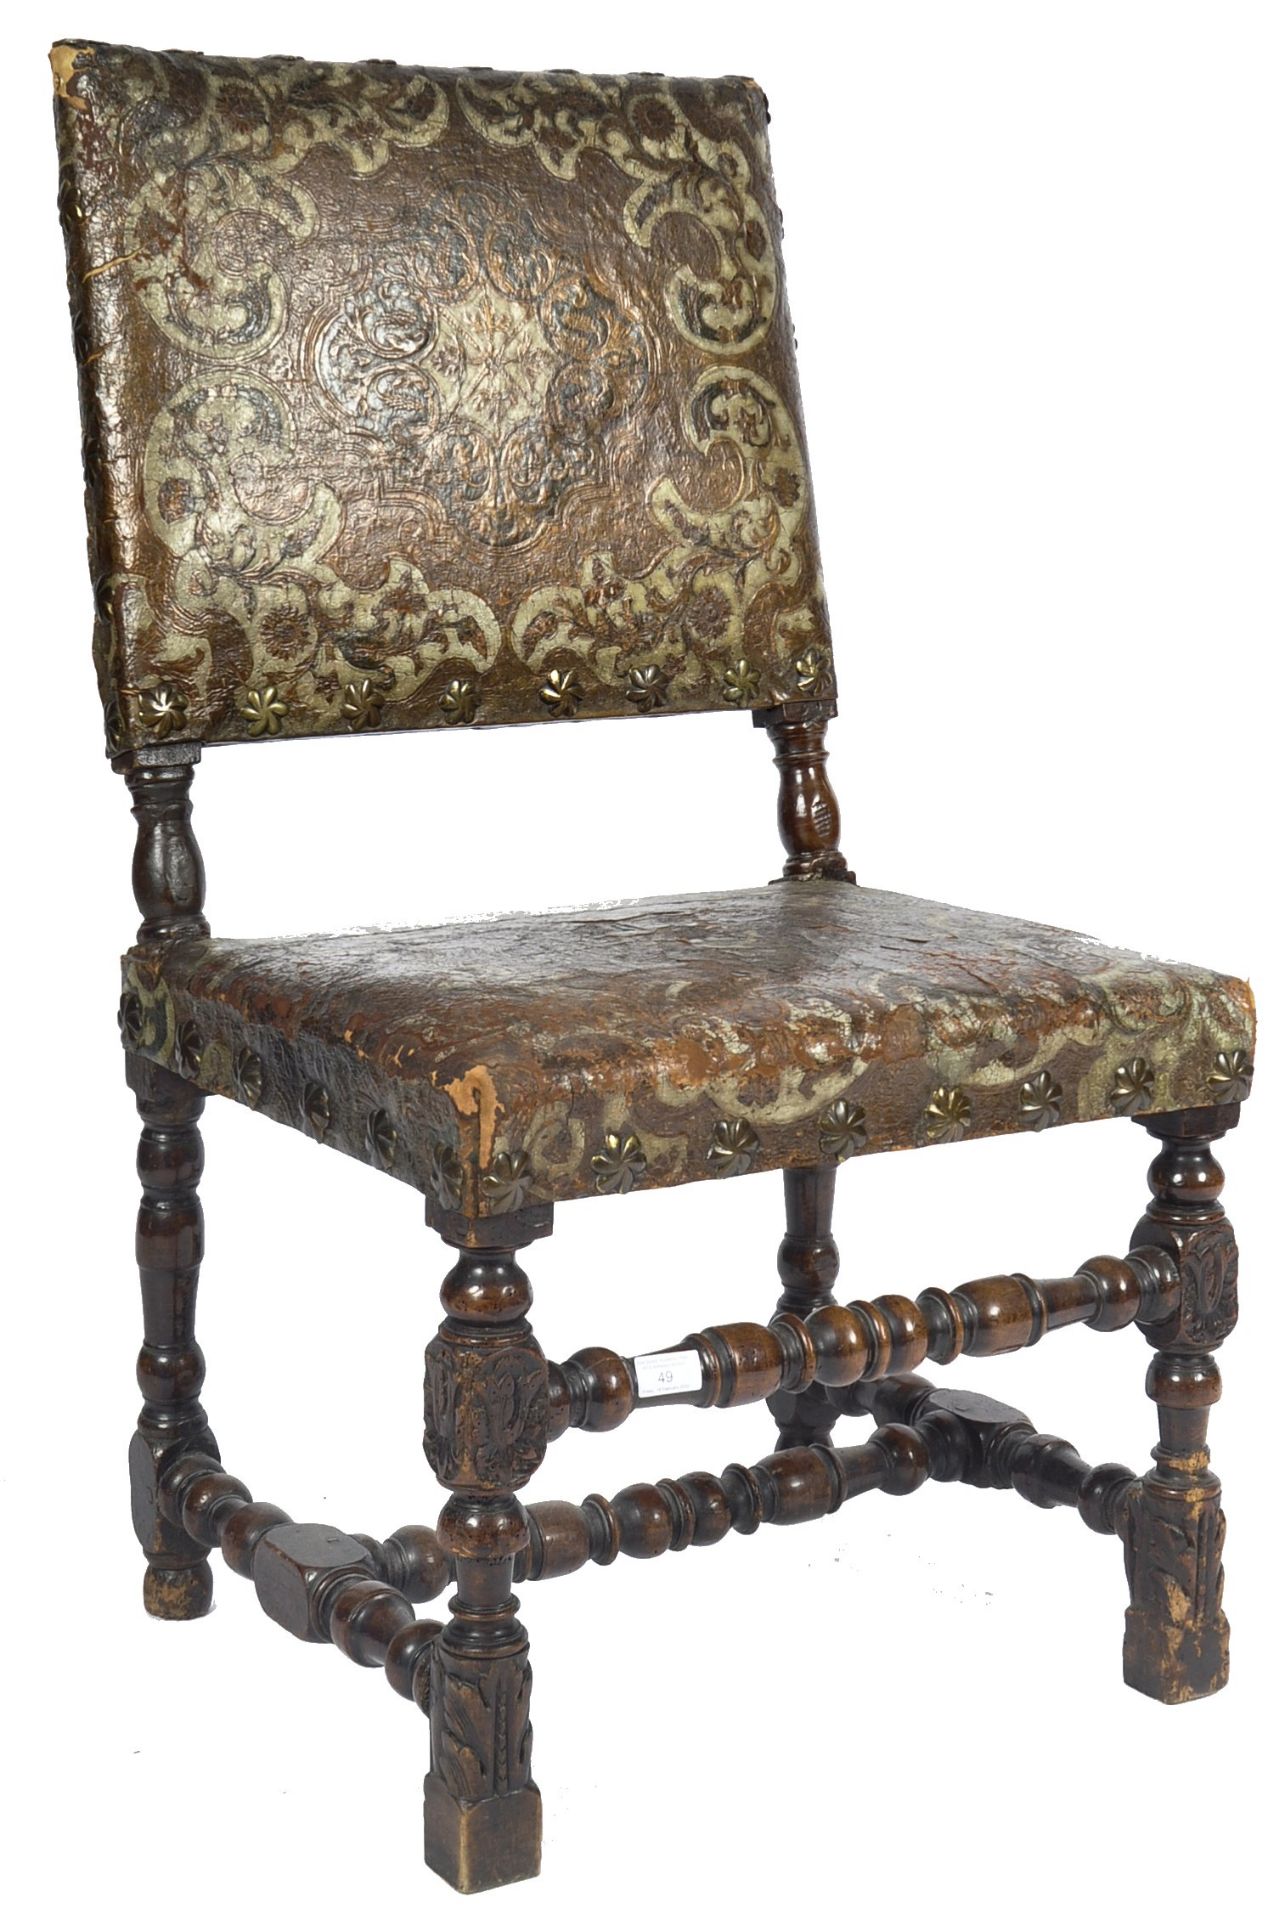 17TH CENTURY SPANISH CARVED WALNUT AND LEATHER CHAIR